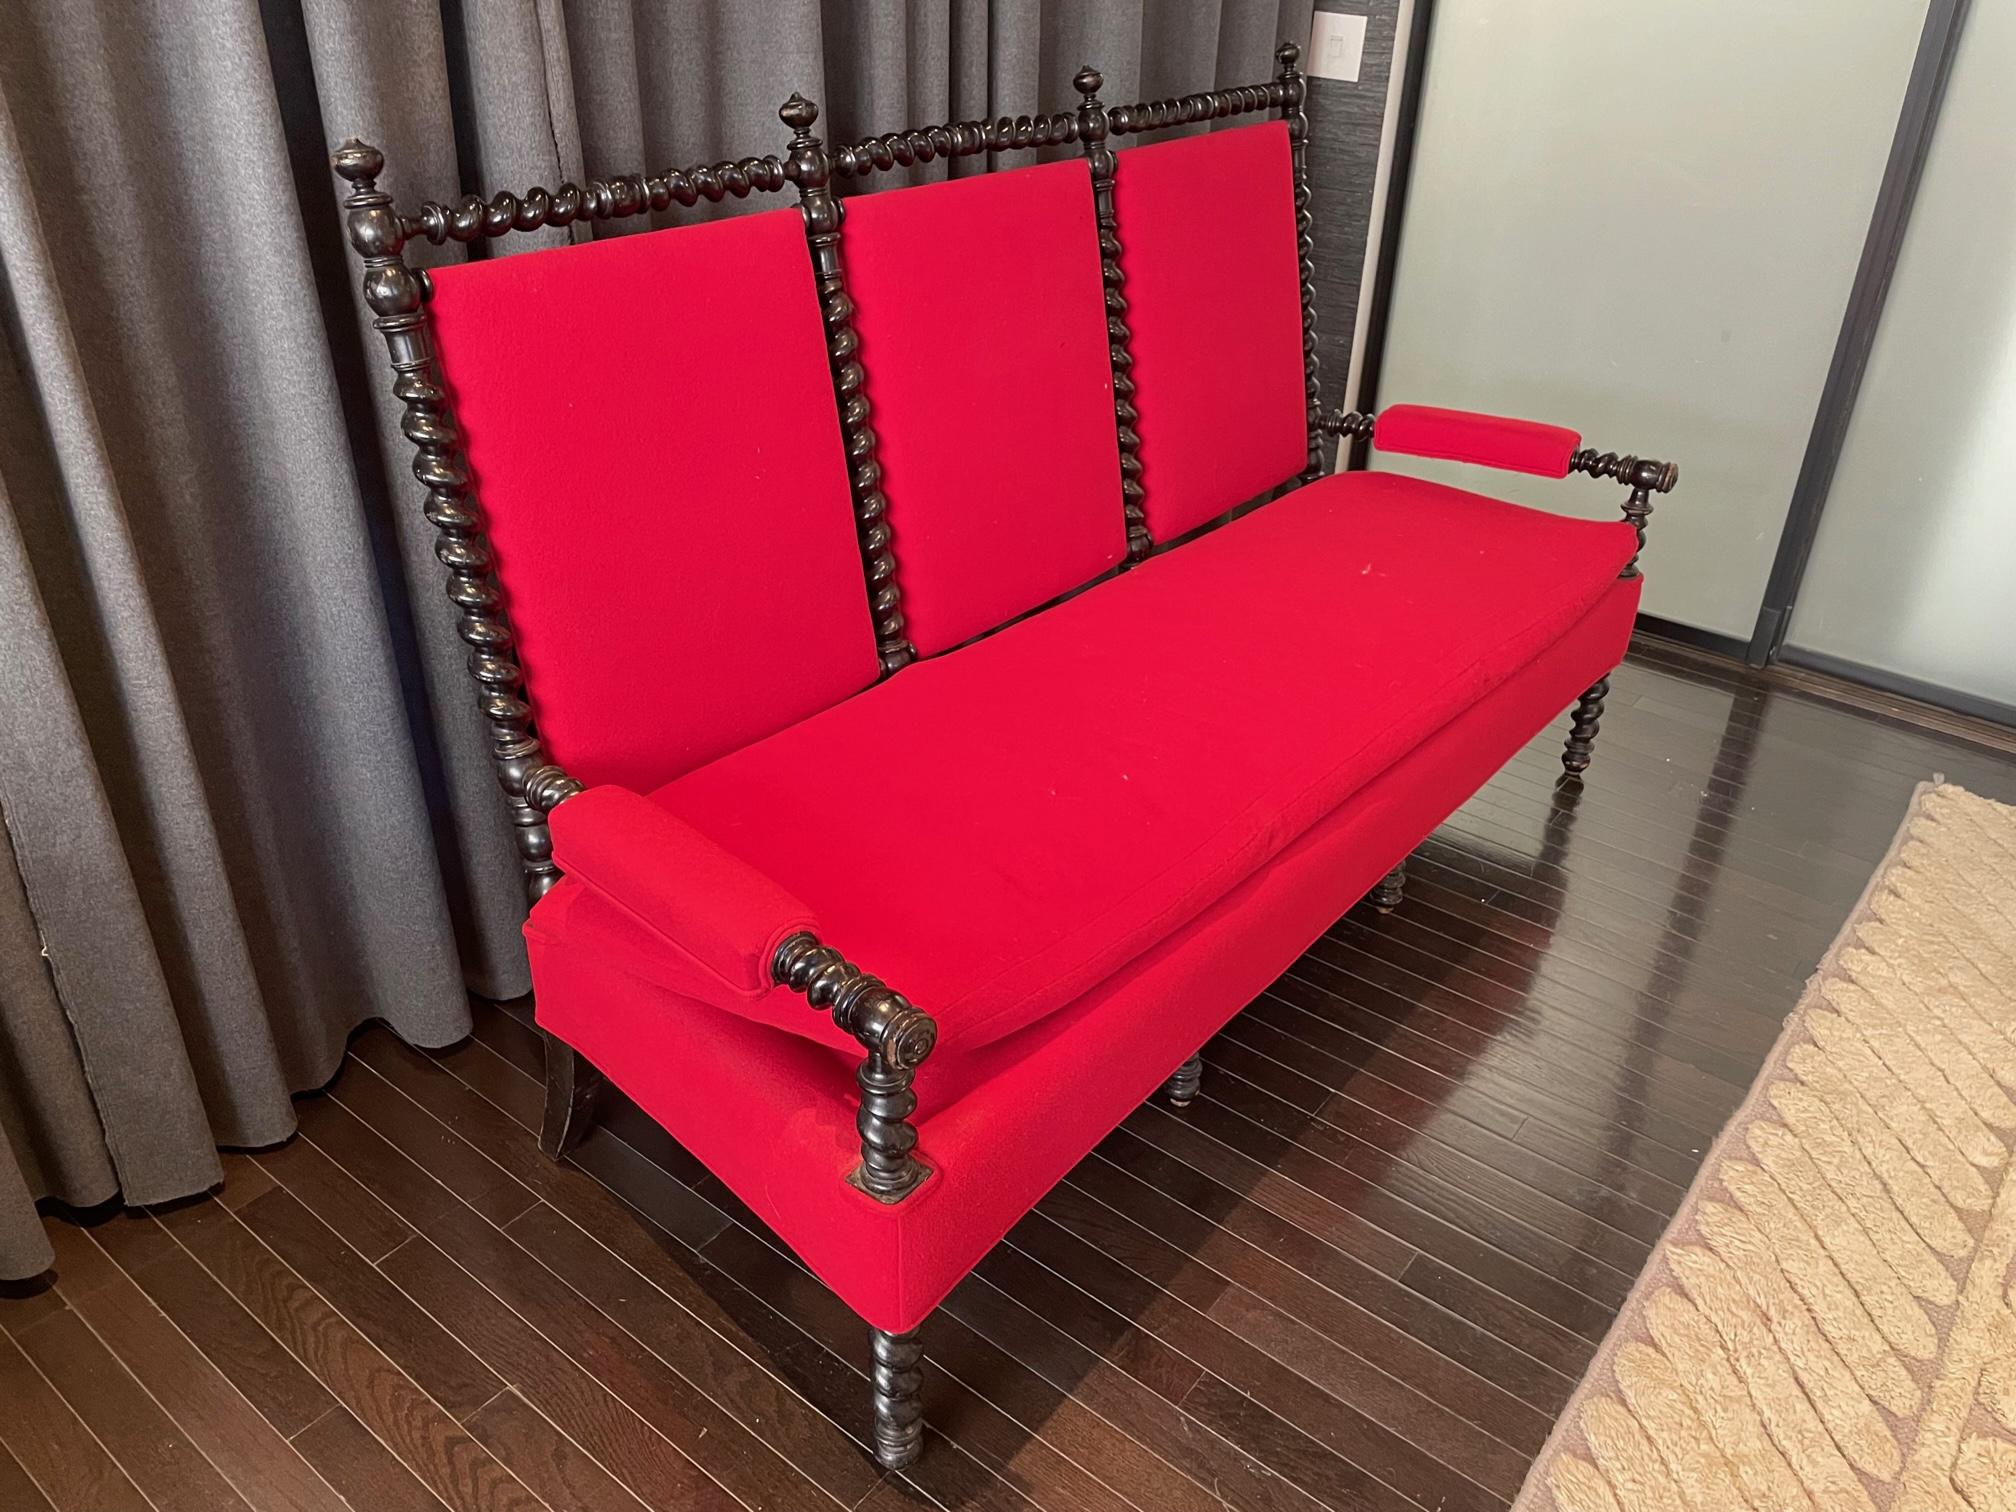 Gilded Age American settee with upholstered seat and carved mahogany frame with spindle detailing. Seat is reupholstered in a bold red wool blend fabric. Circa 1890-1910.